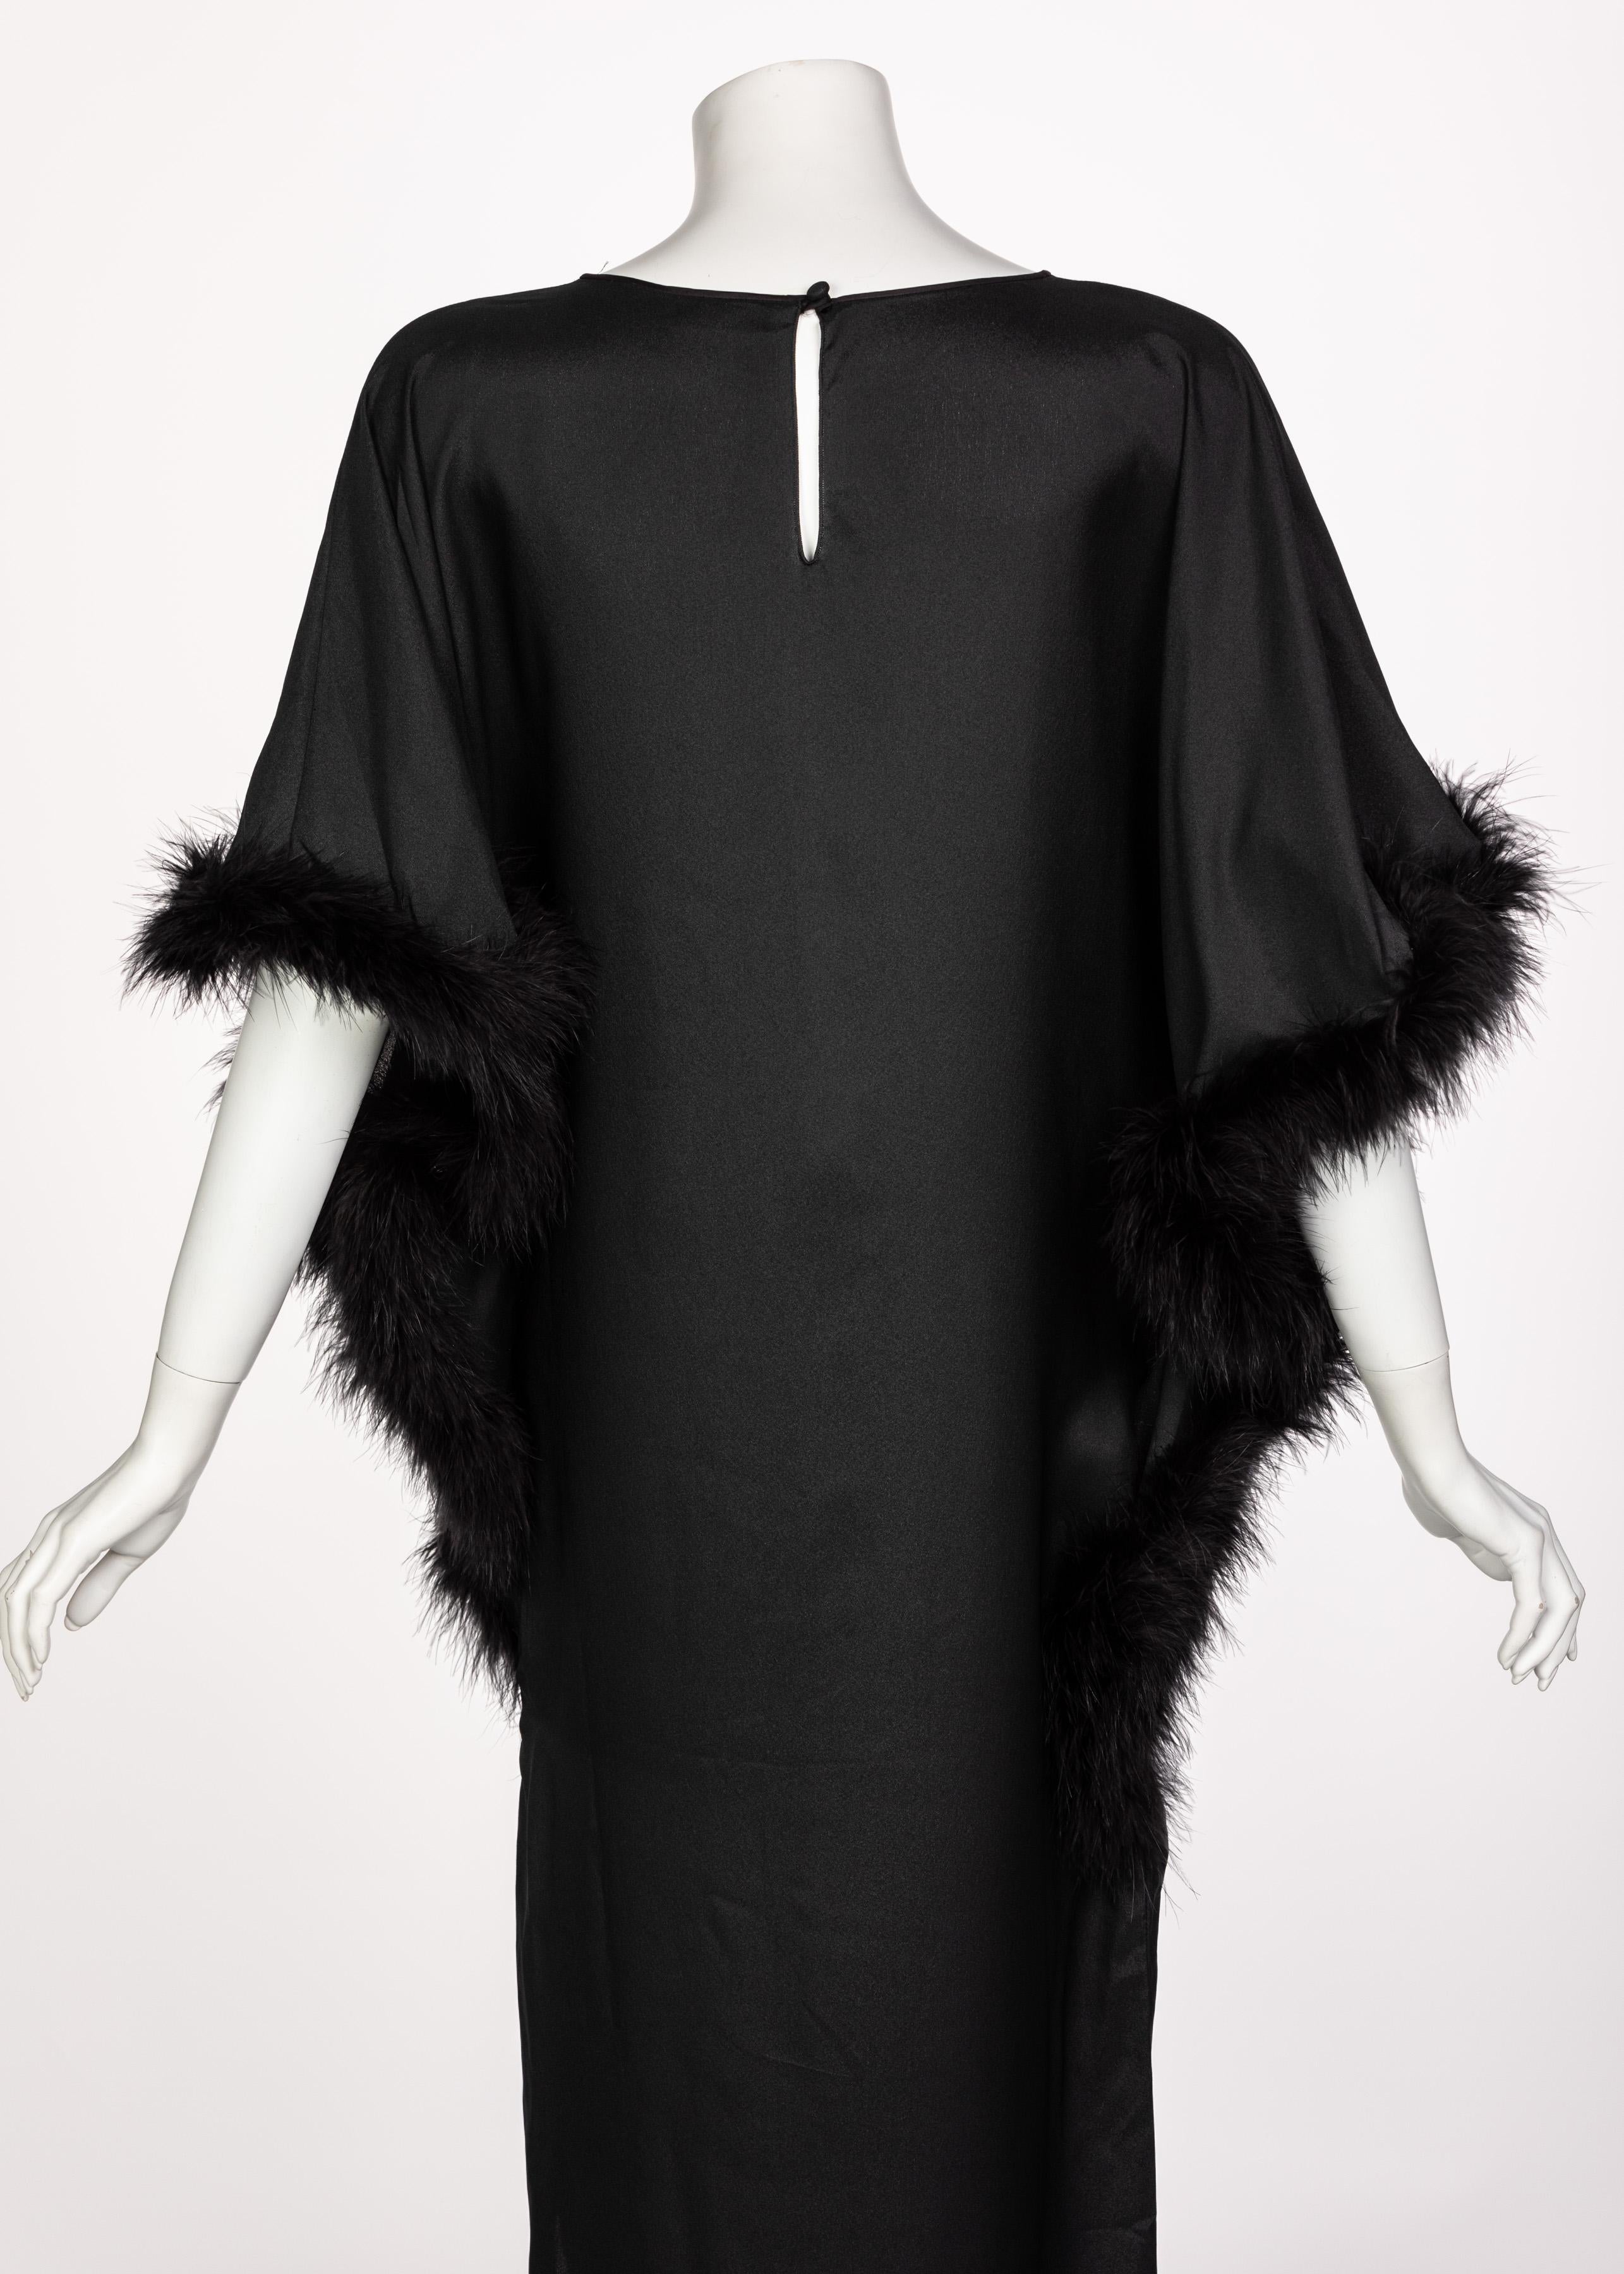 Lucie Anne Black Feather Caftan, 1970s 5